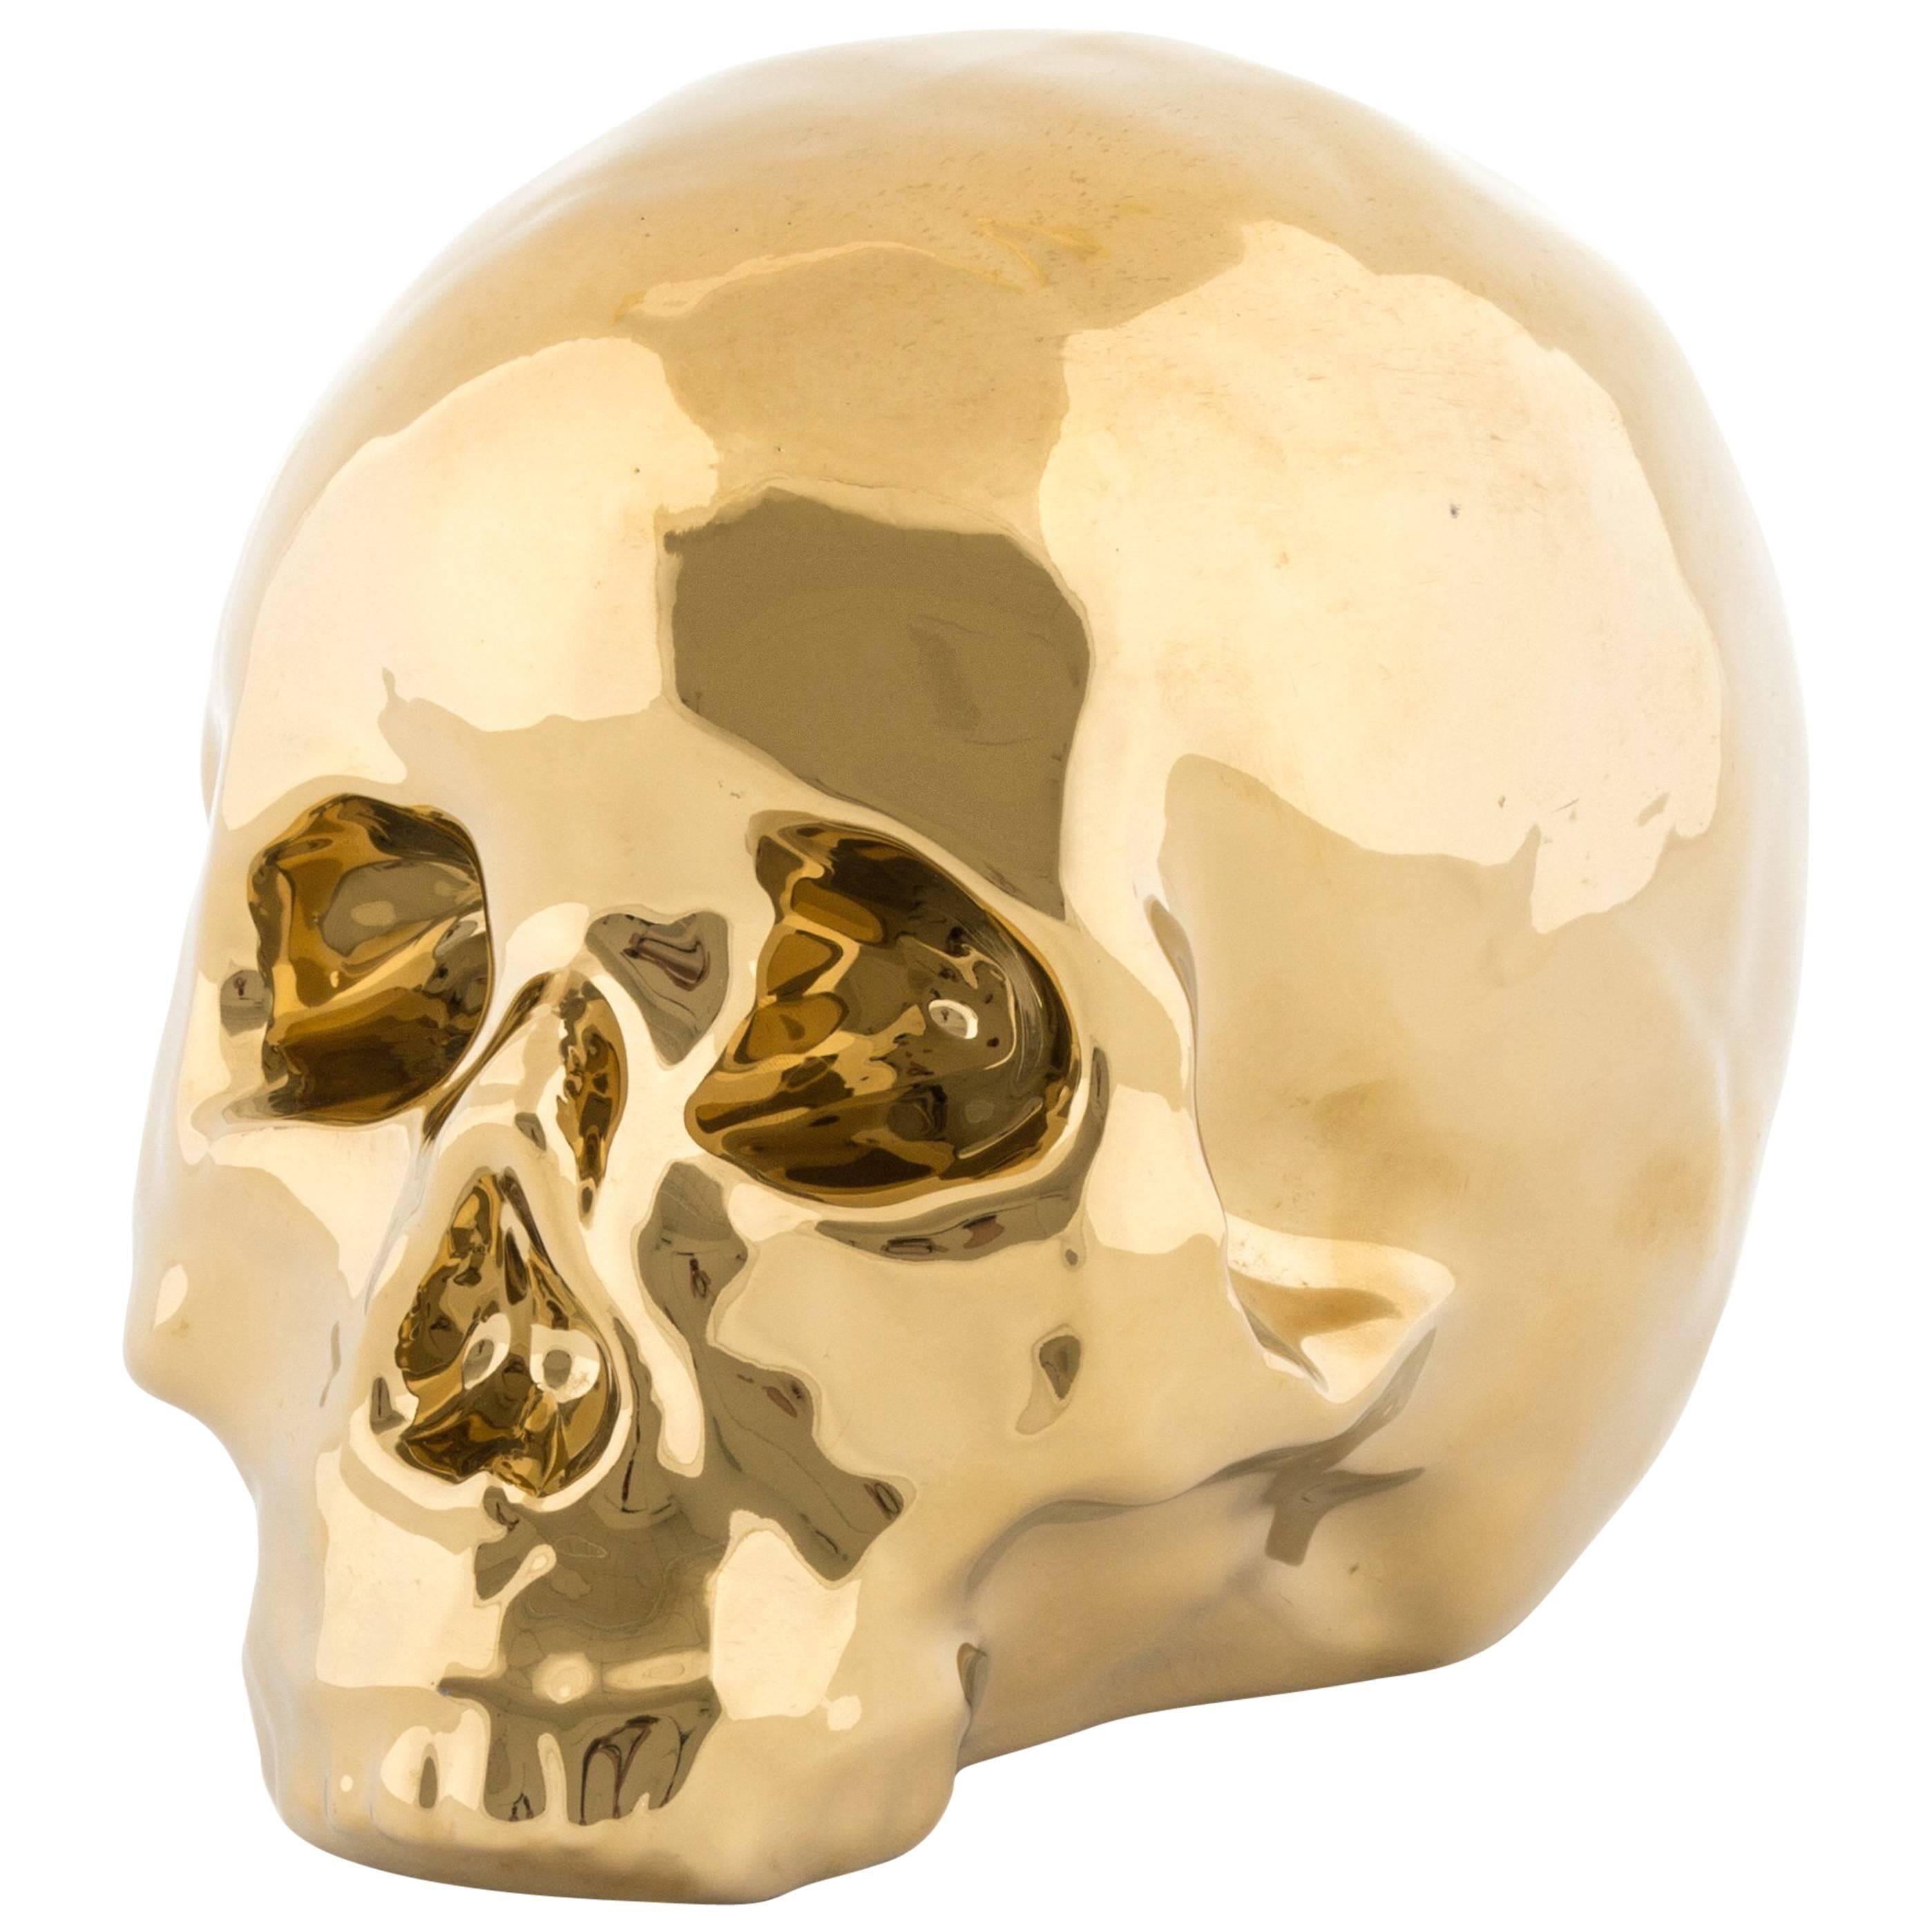 Seletti Limited Gold Edition "My Skull" in Porcelain